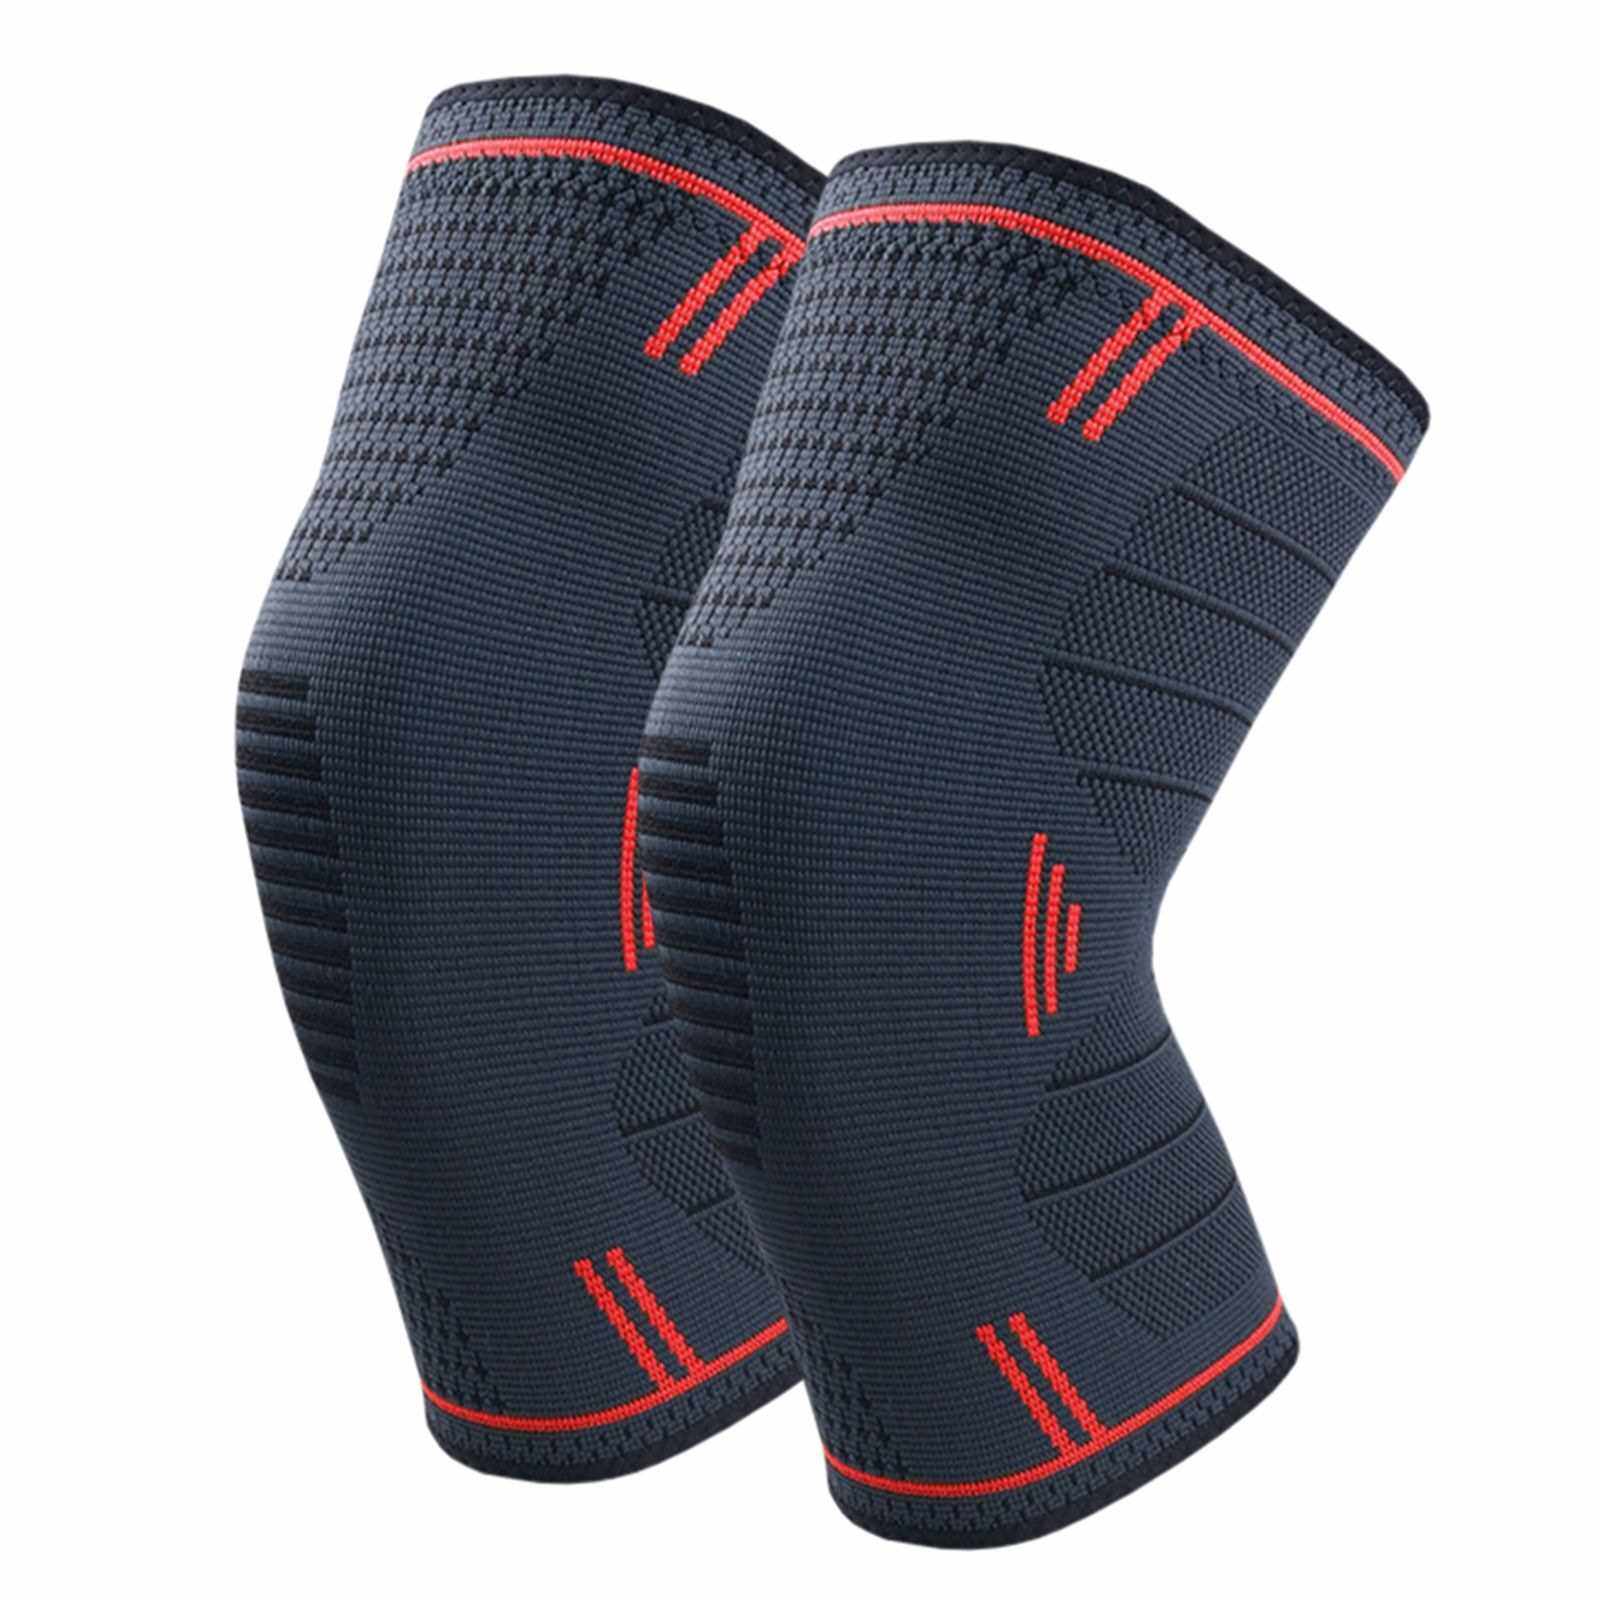 BEST SELLER Protective Knee Pads Anti-slip Knee Brace Compression Knee Support Joint Protection for Sports (Rm)